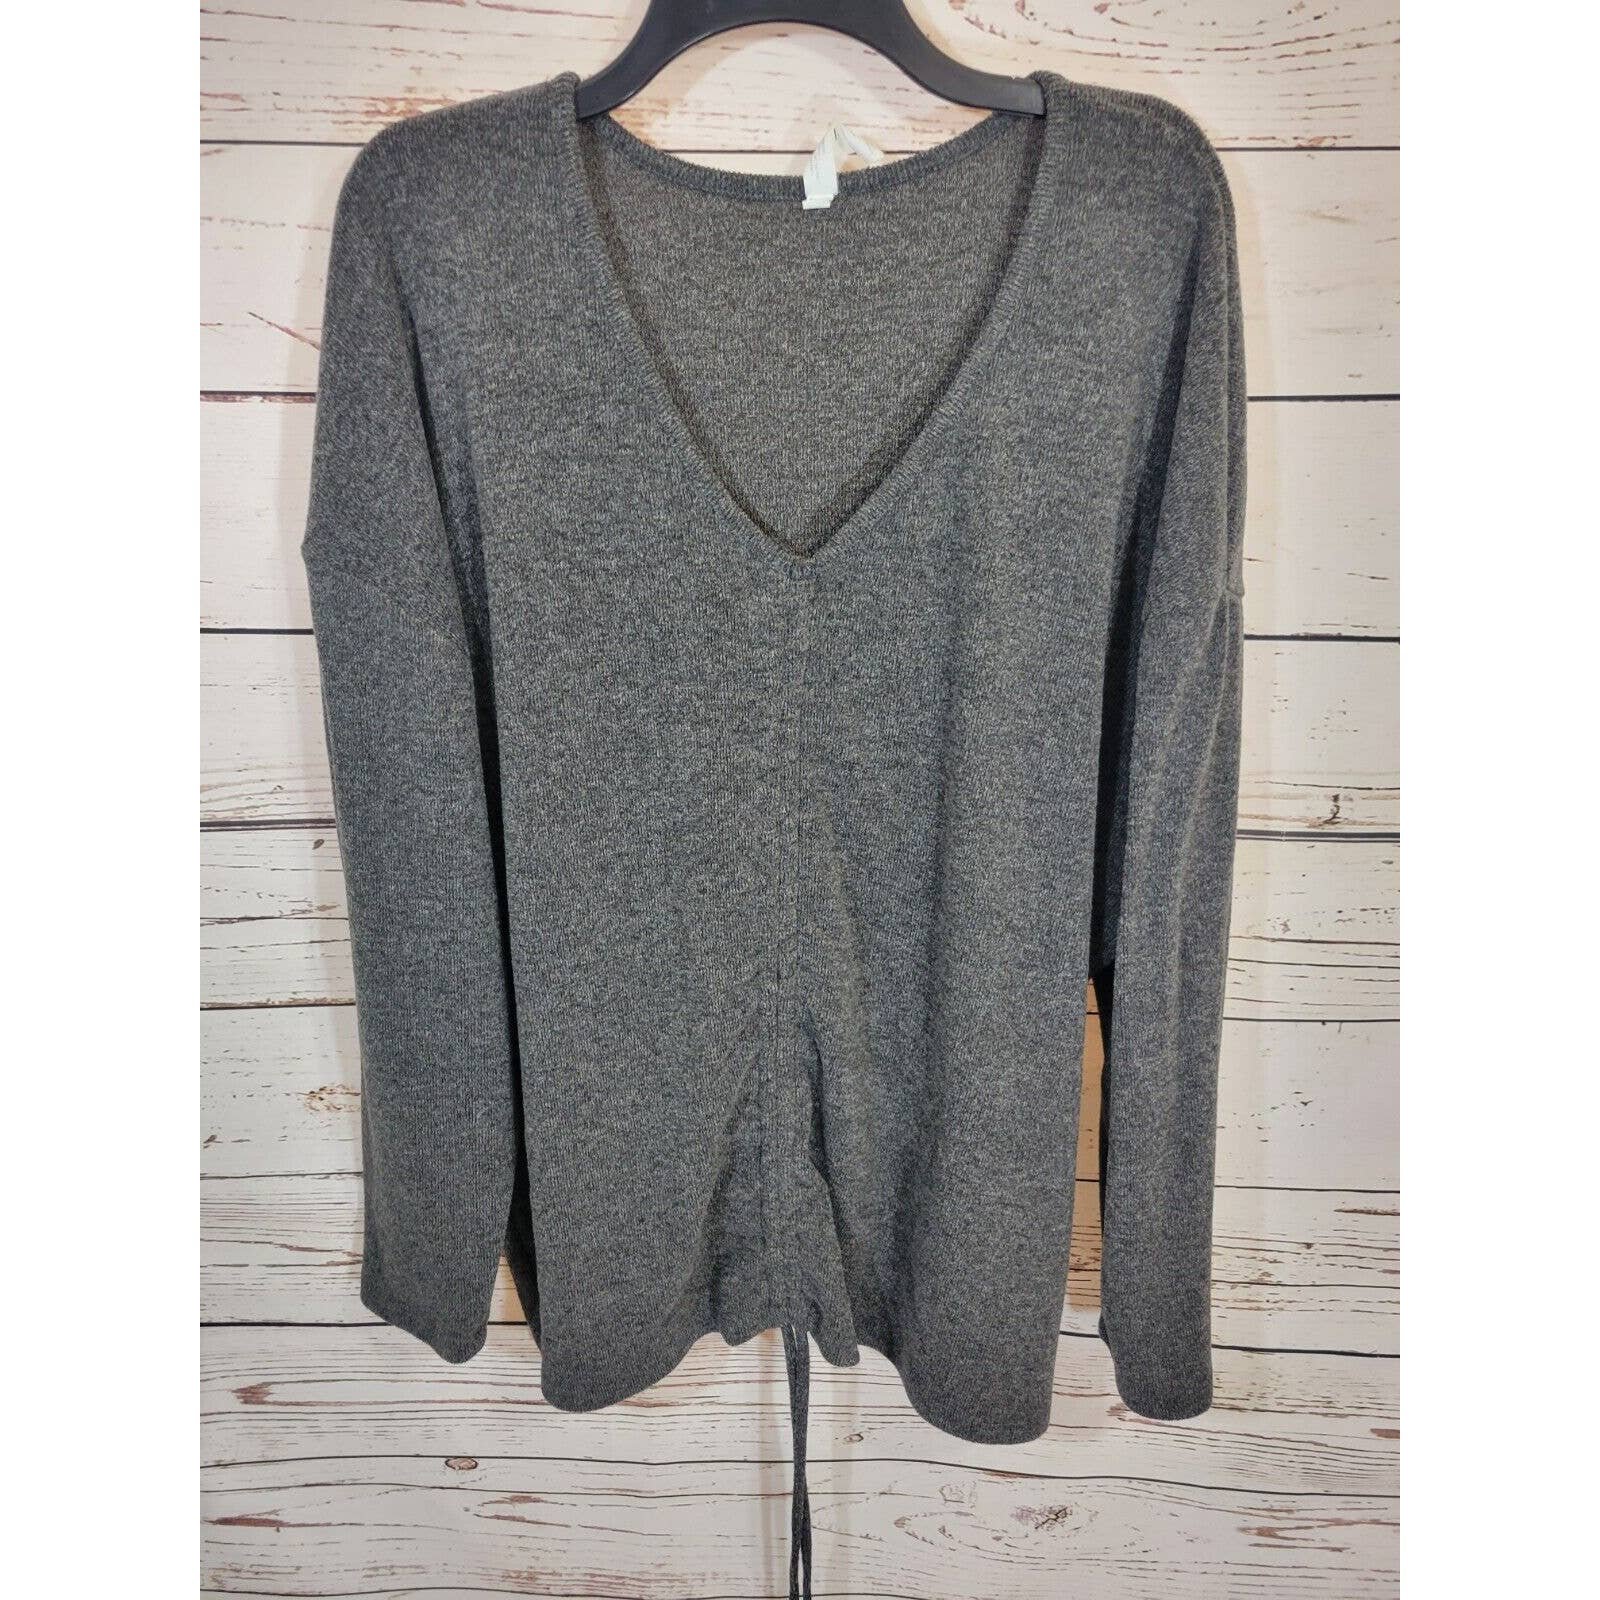 big discount LIVI Lane Bryant Gray V-Neck Cinched Knit Stretch Long Sleeve Top Size 22/24 HH8RfHUoo Low Price